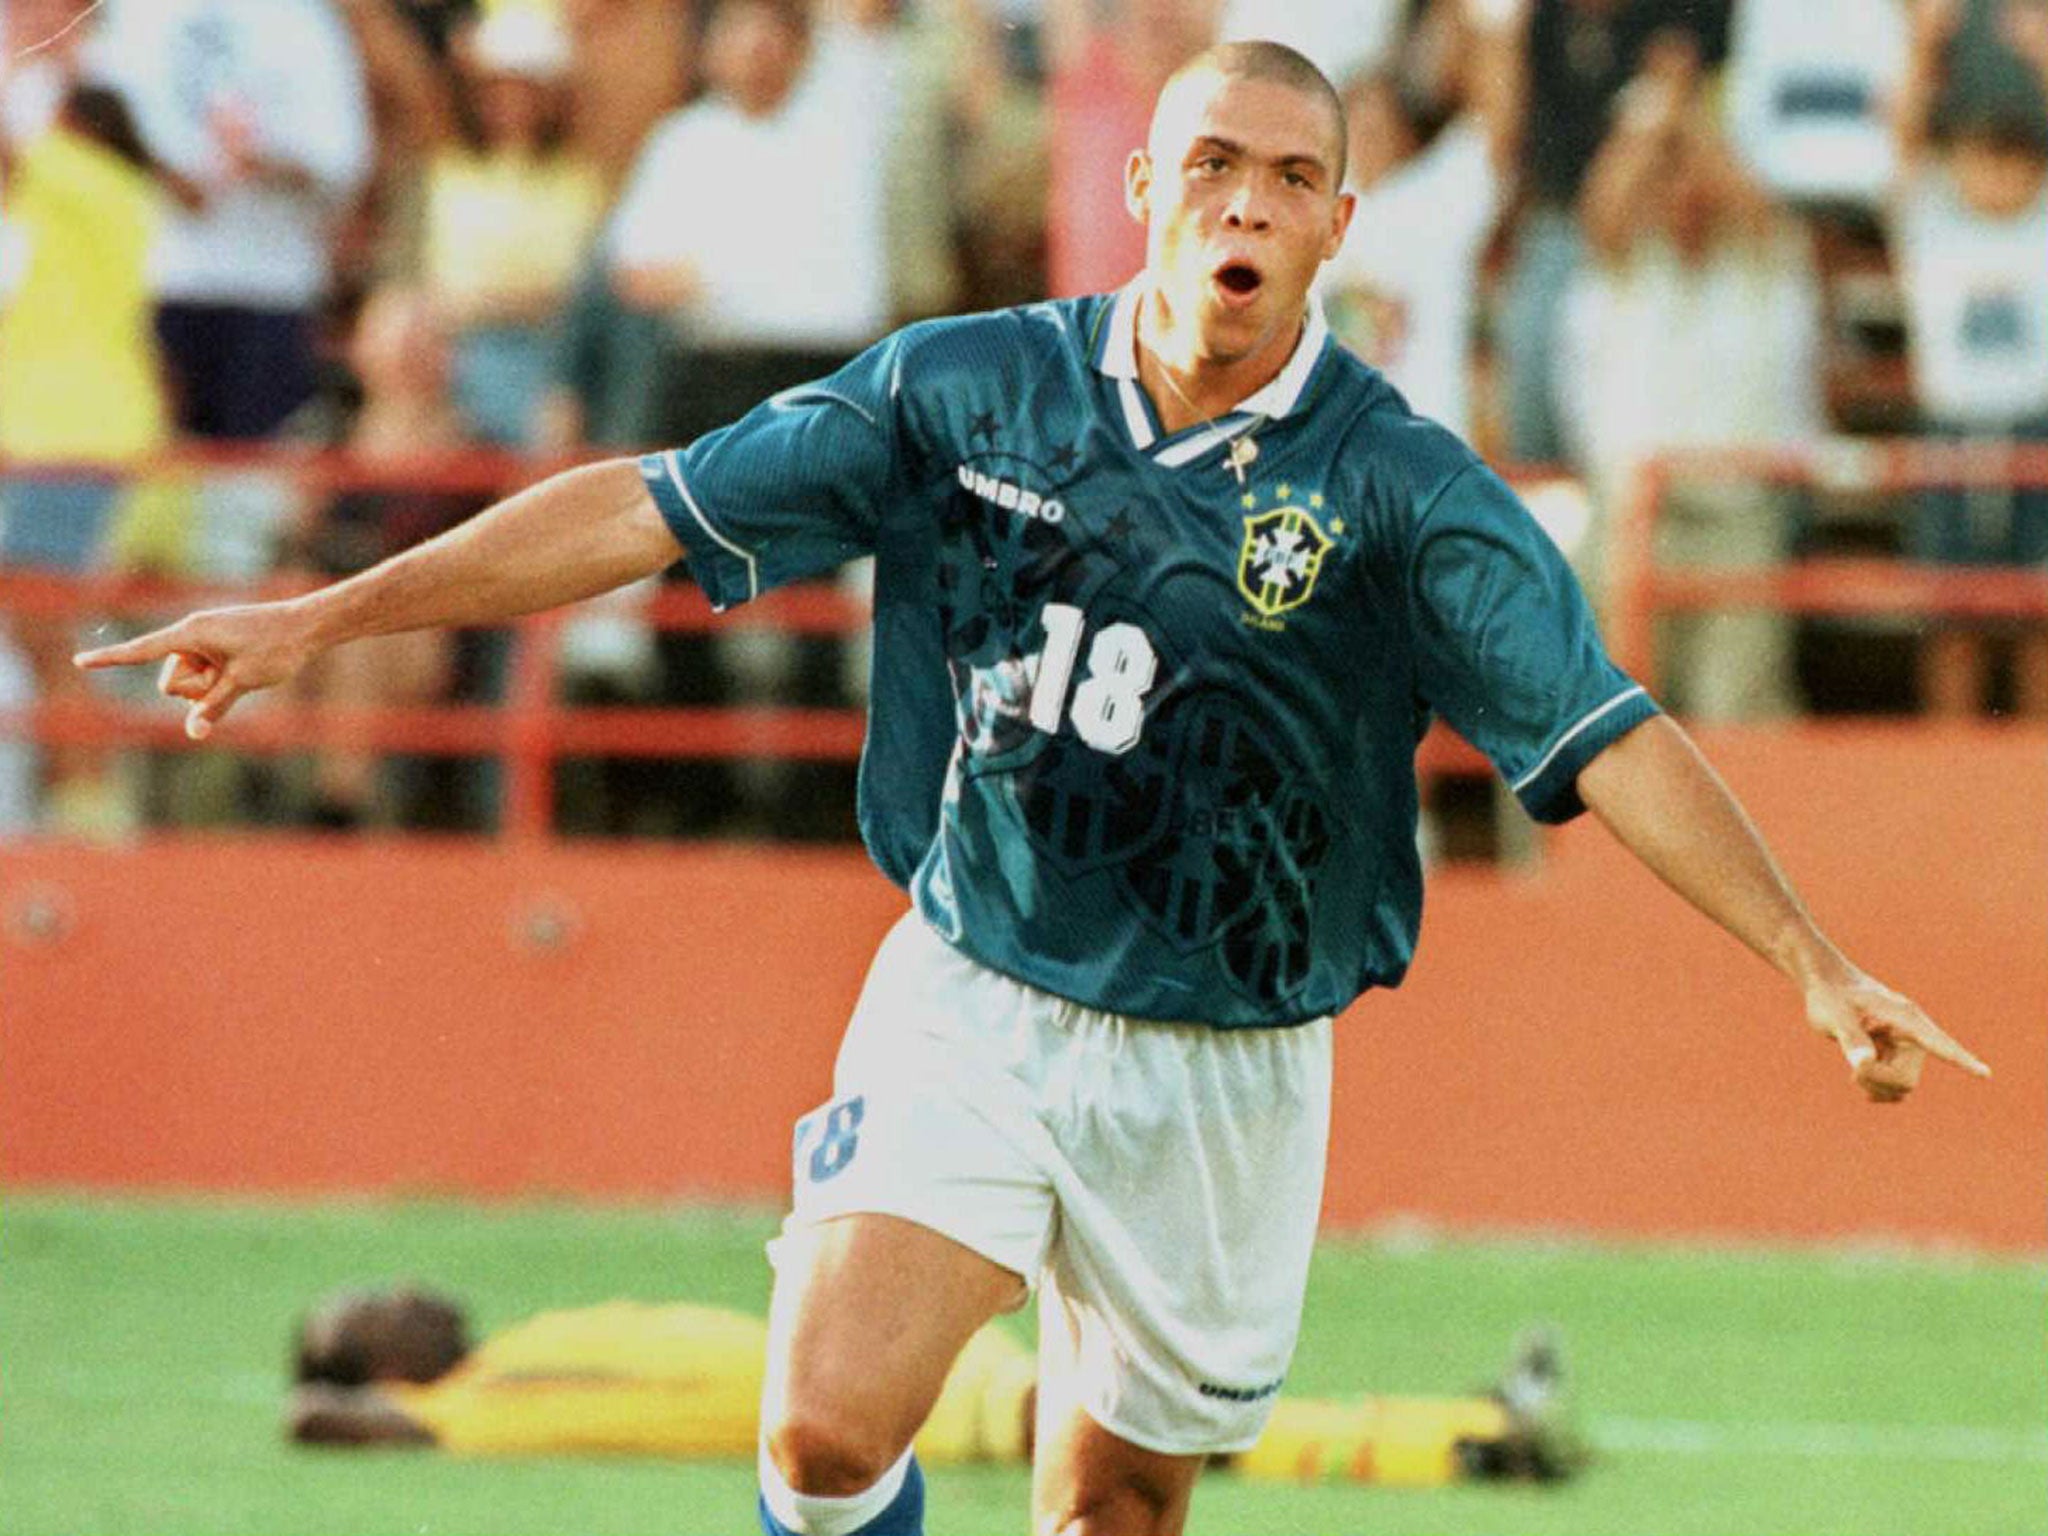 Ronaldo, the original, had an aura of swagger and confidence about him from the very beginning